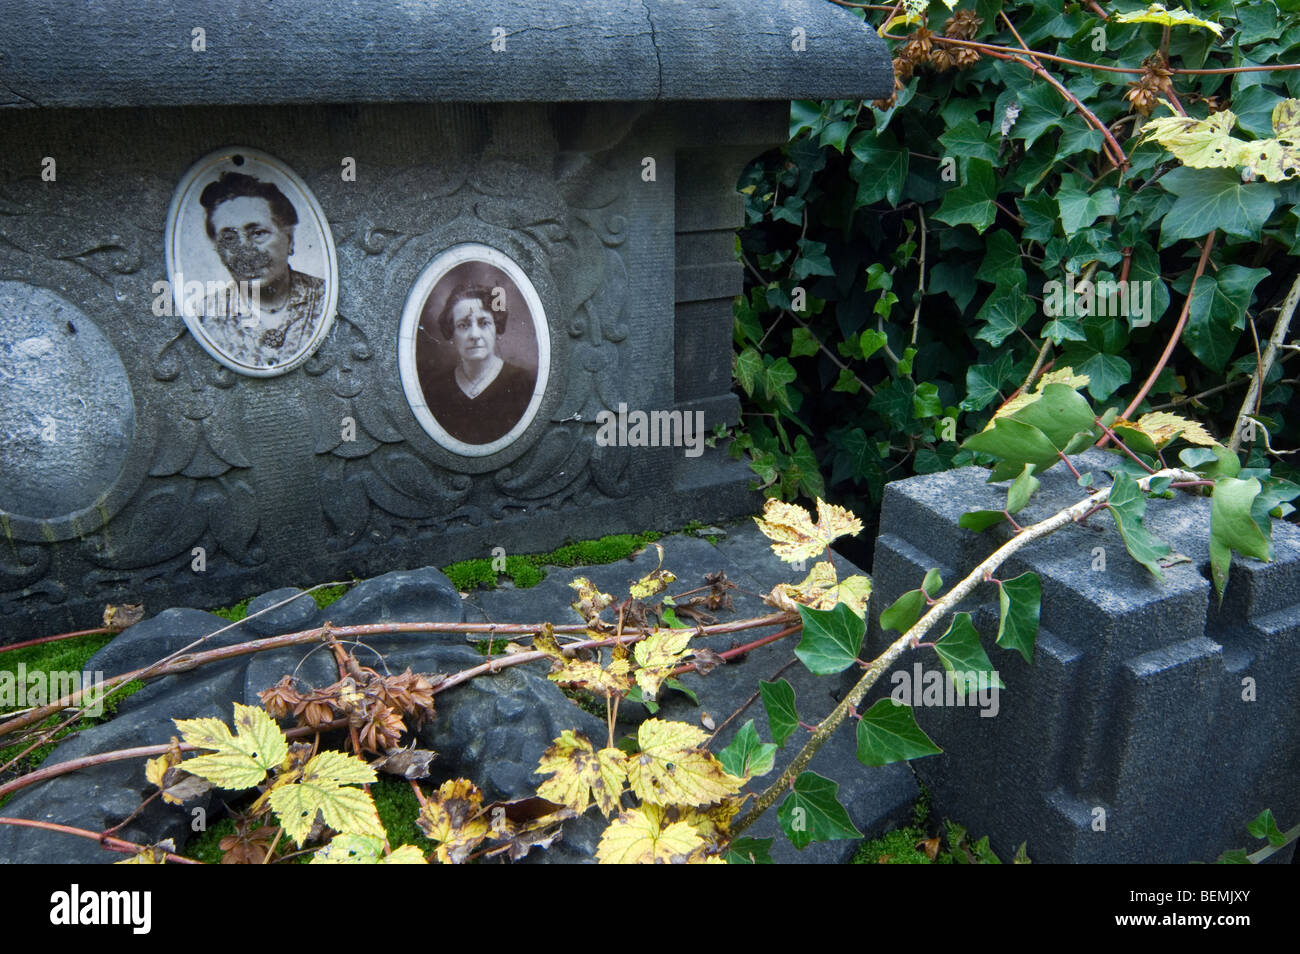 Old pictures on forgotten overgrown family grave / tomb covered in vegetation at cemetery in autumn Stock Photo